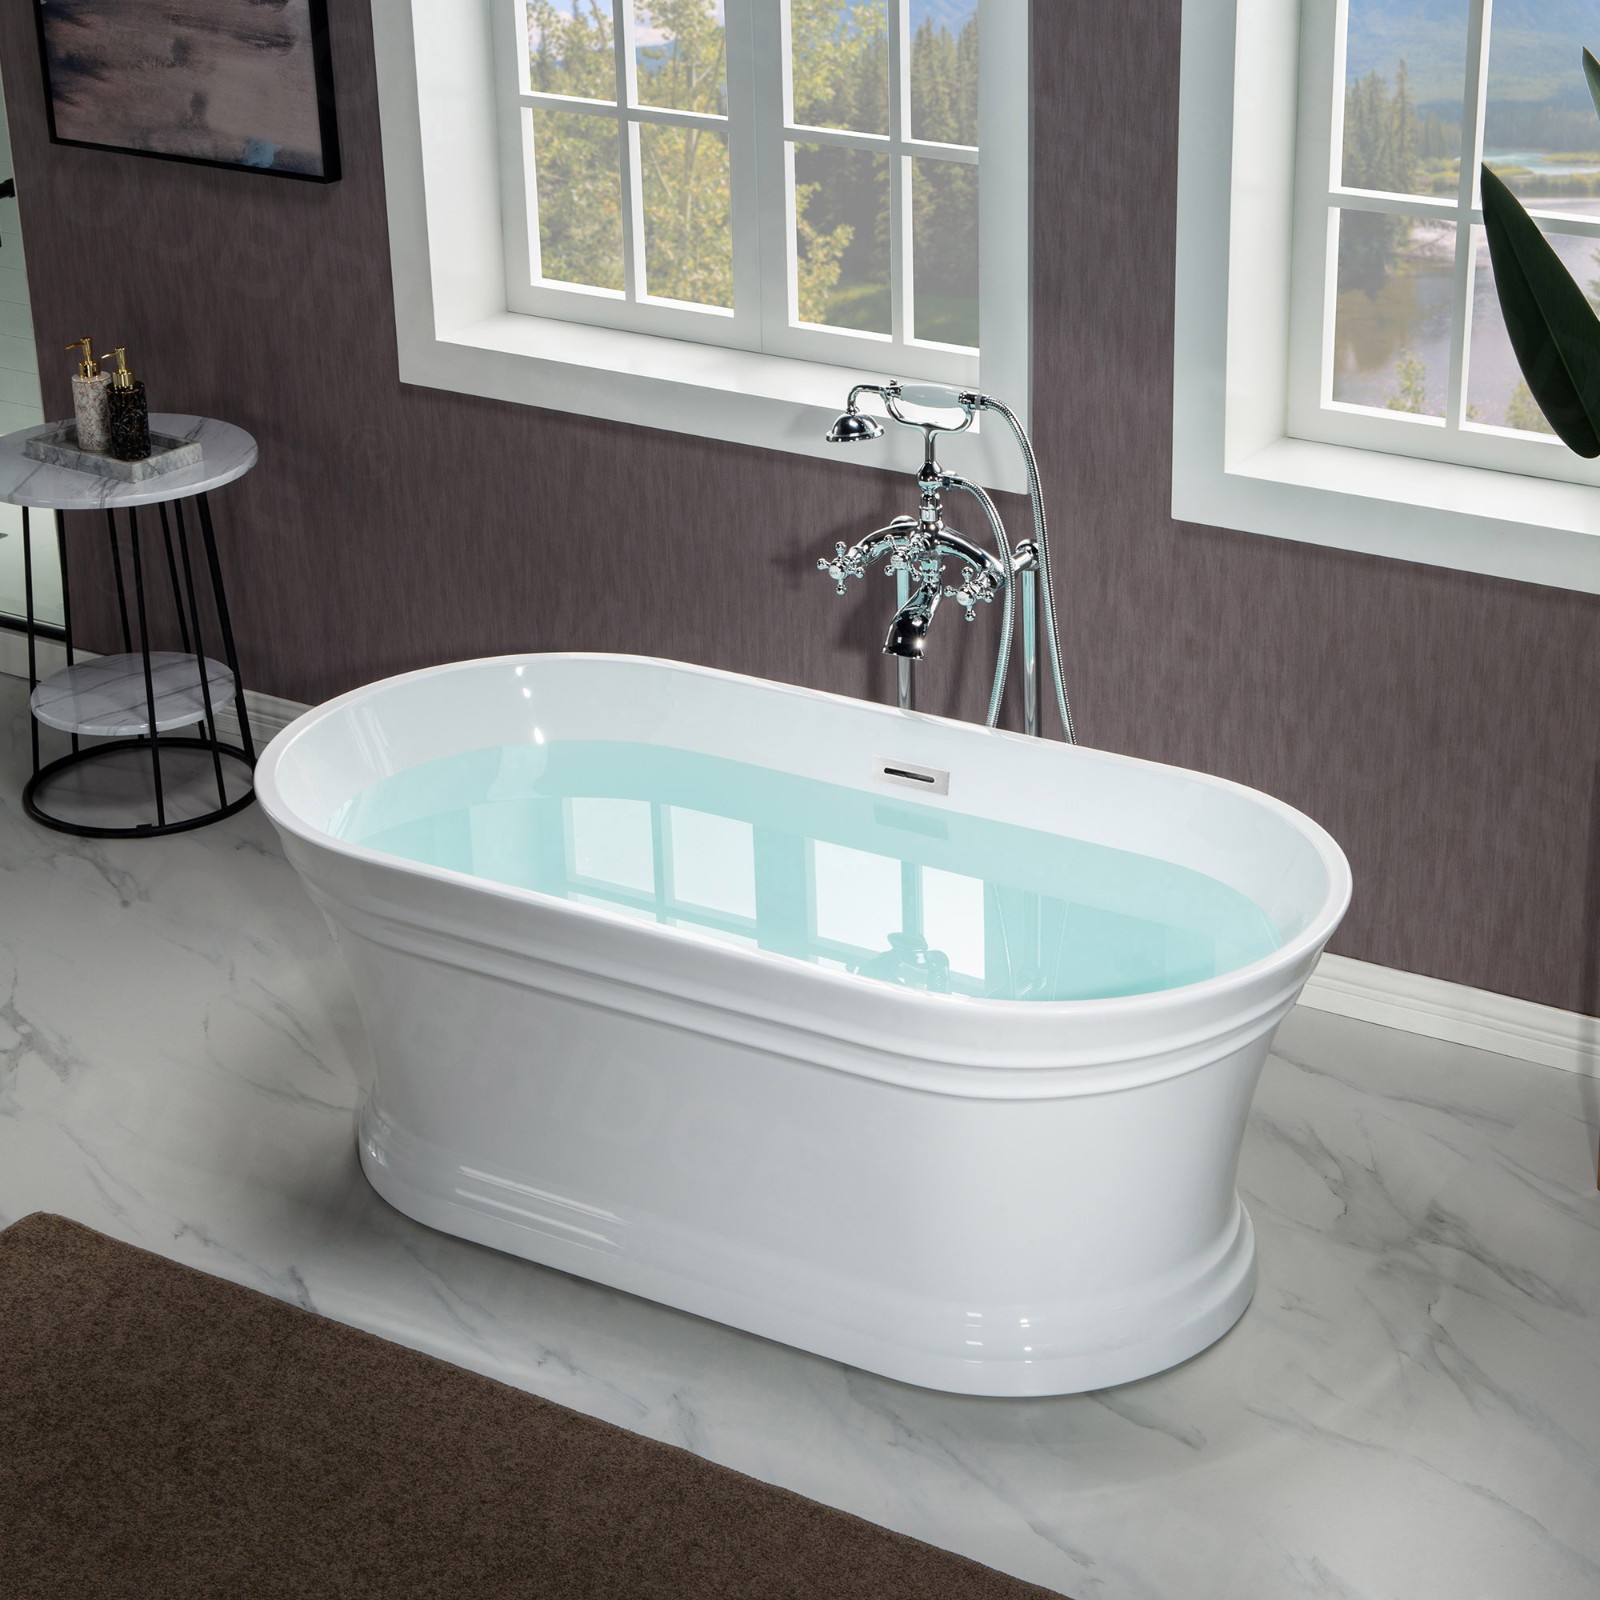  WOODBRIDGE 59 in. Freestanding Double Ended Acrylic Soaking Bathtub with Center Drain Assembly and Overflow, BTA1536/B1536, Glossy White_7834